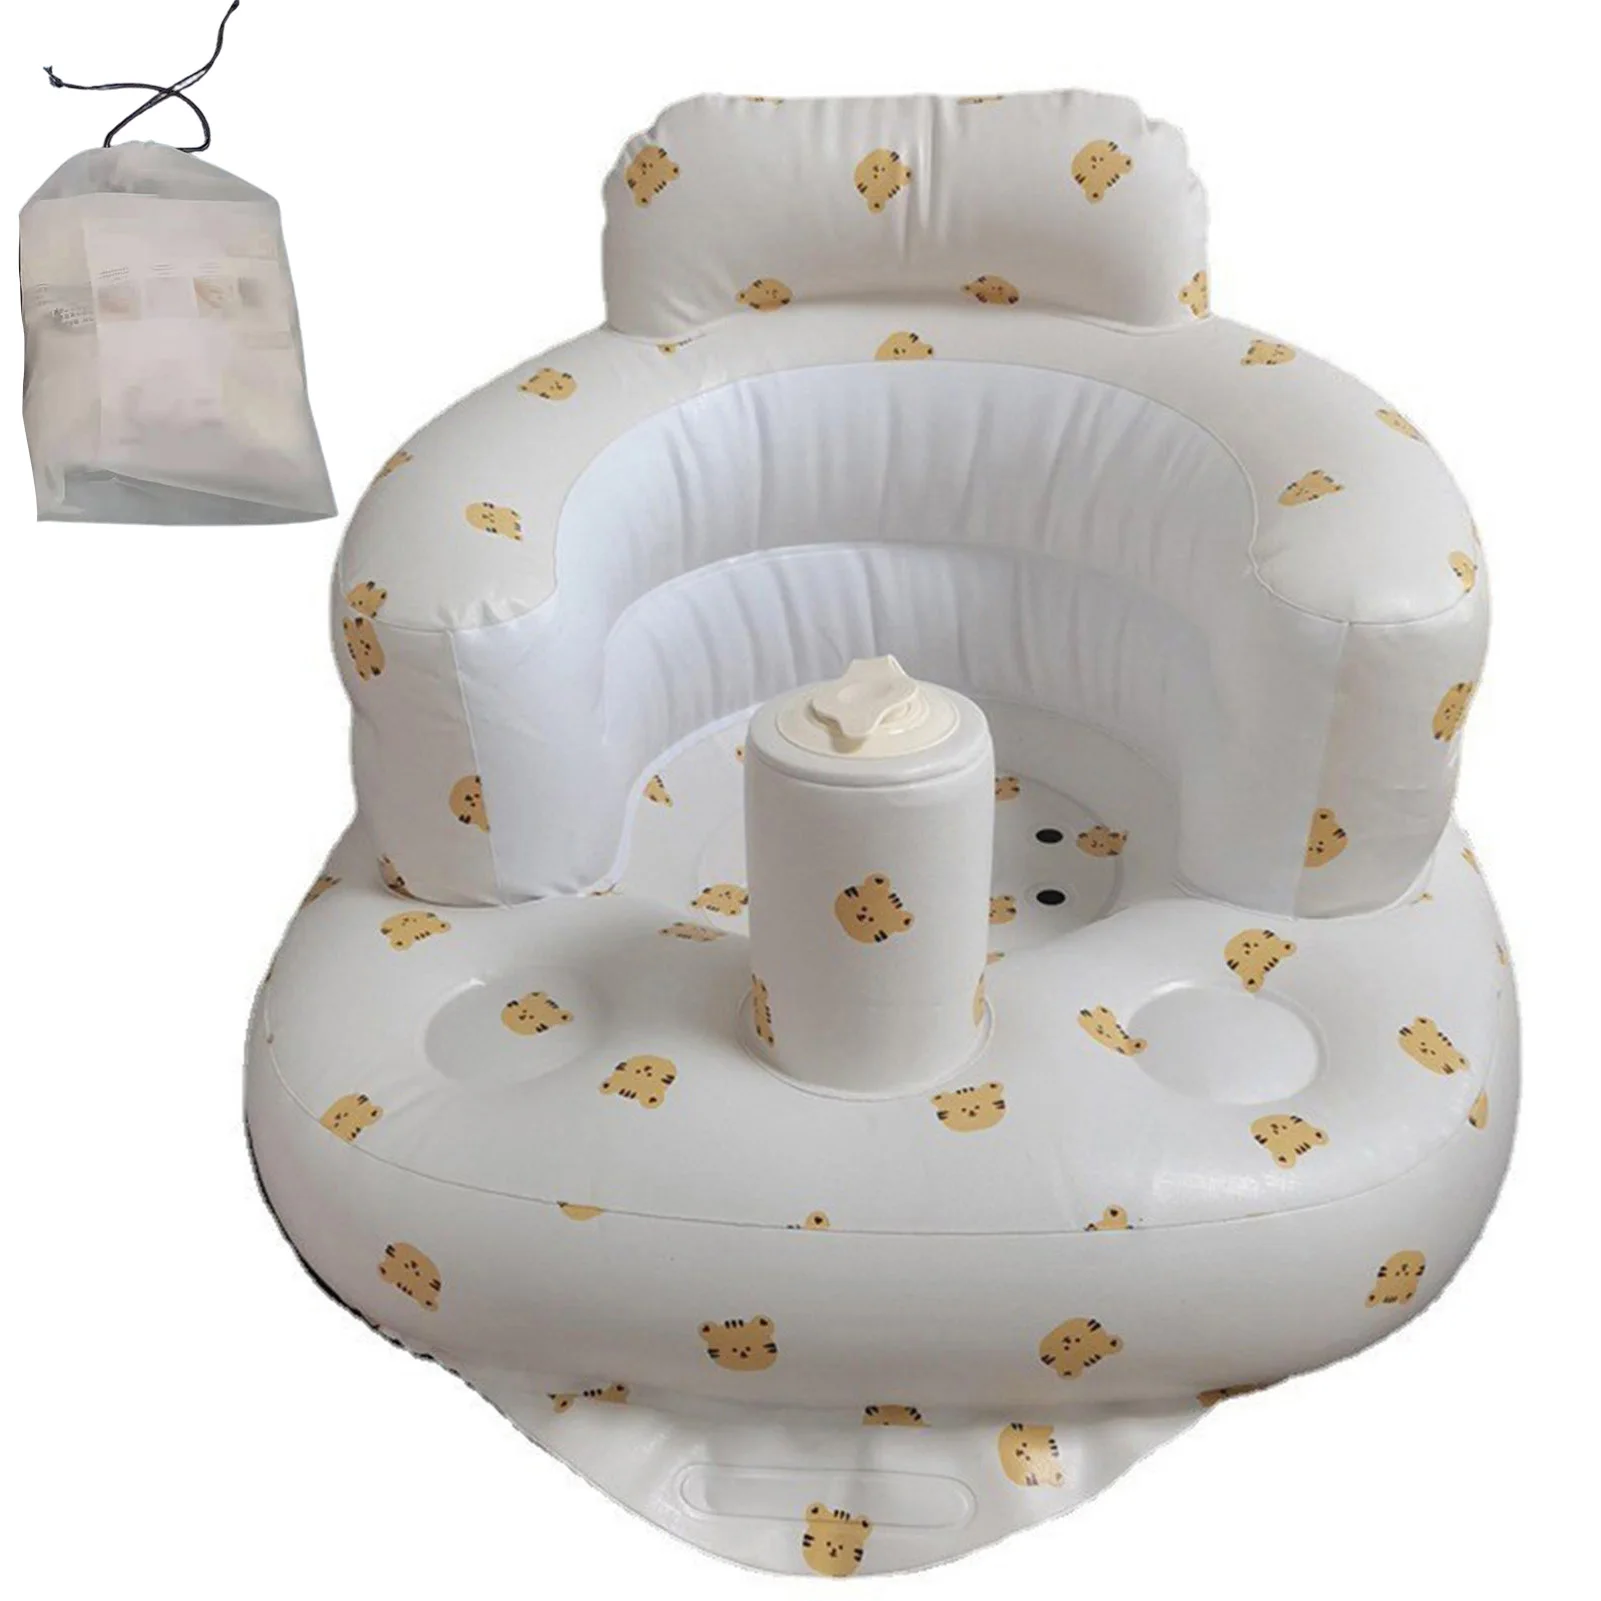 

Baby Inflatable Seat Portable Pool Float Chair For Infant Baby Shower Chair For 336 Months Toddlers Comfortable Tall-up Back To